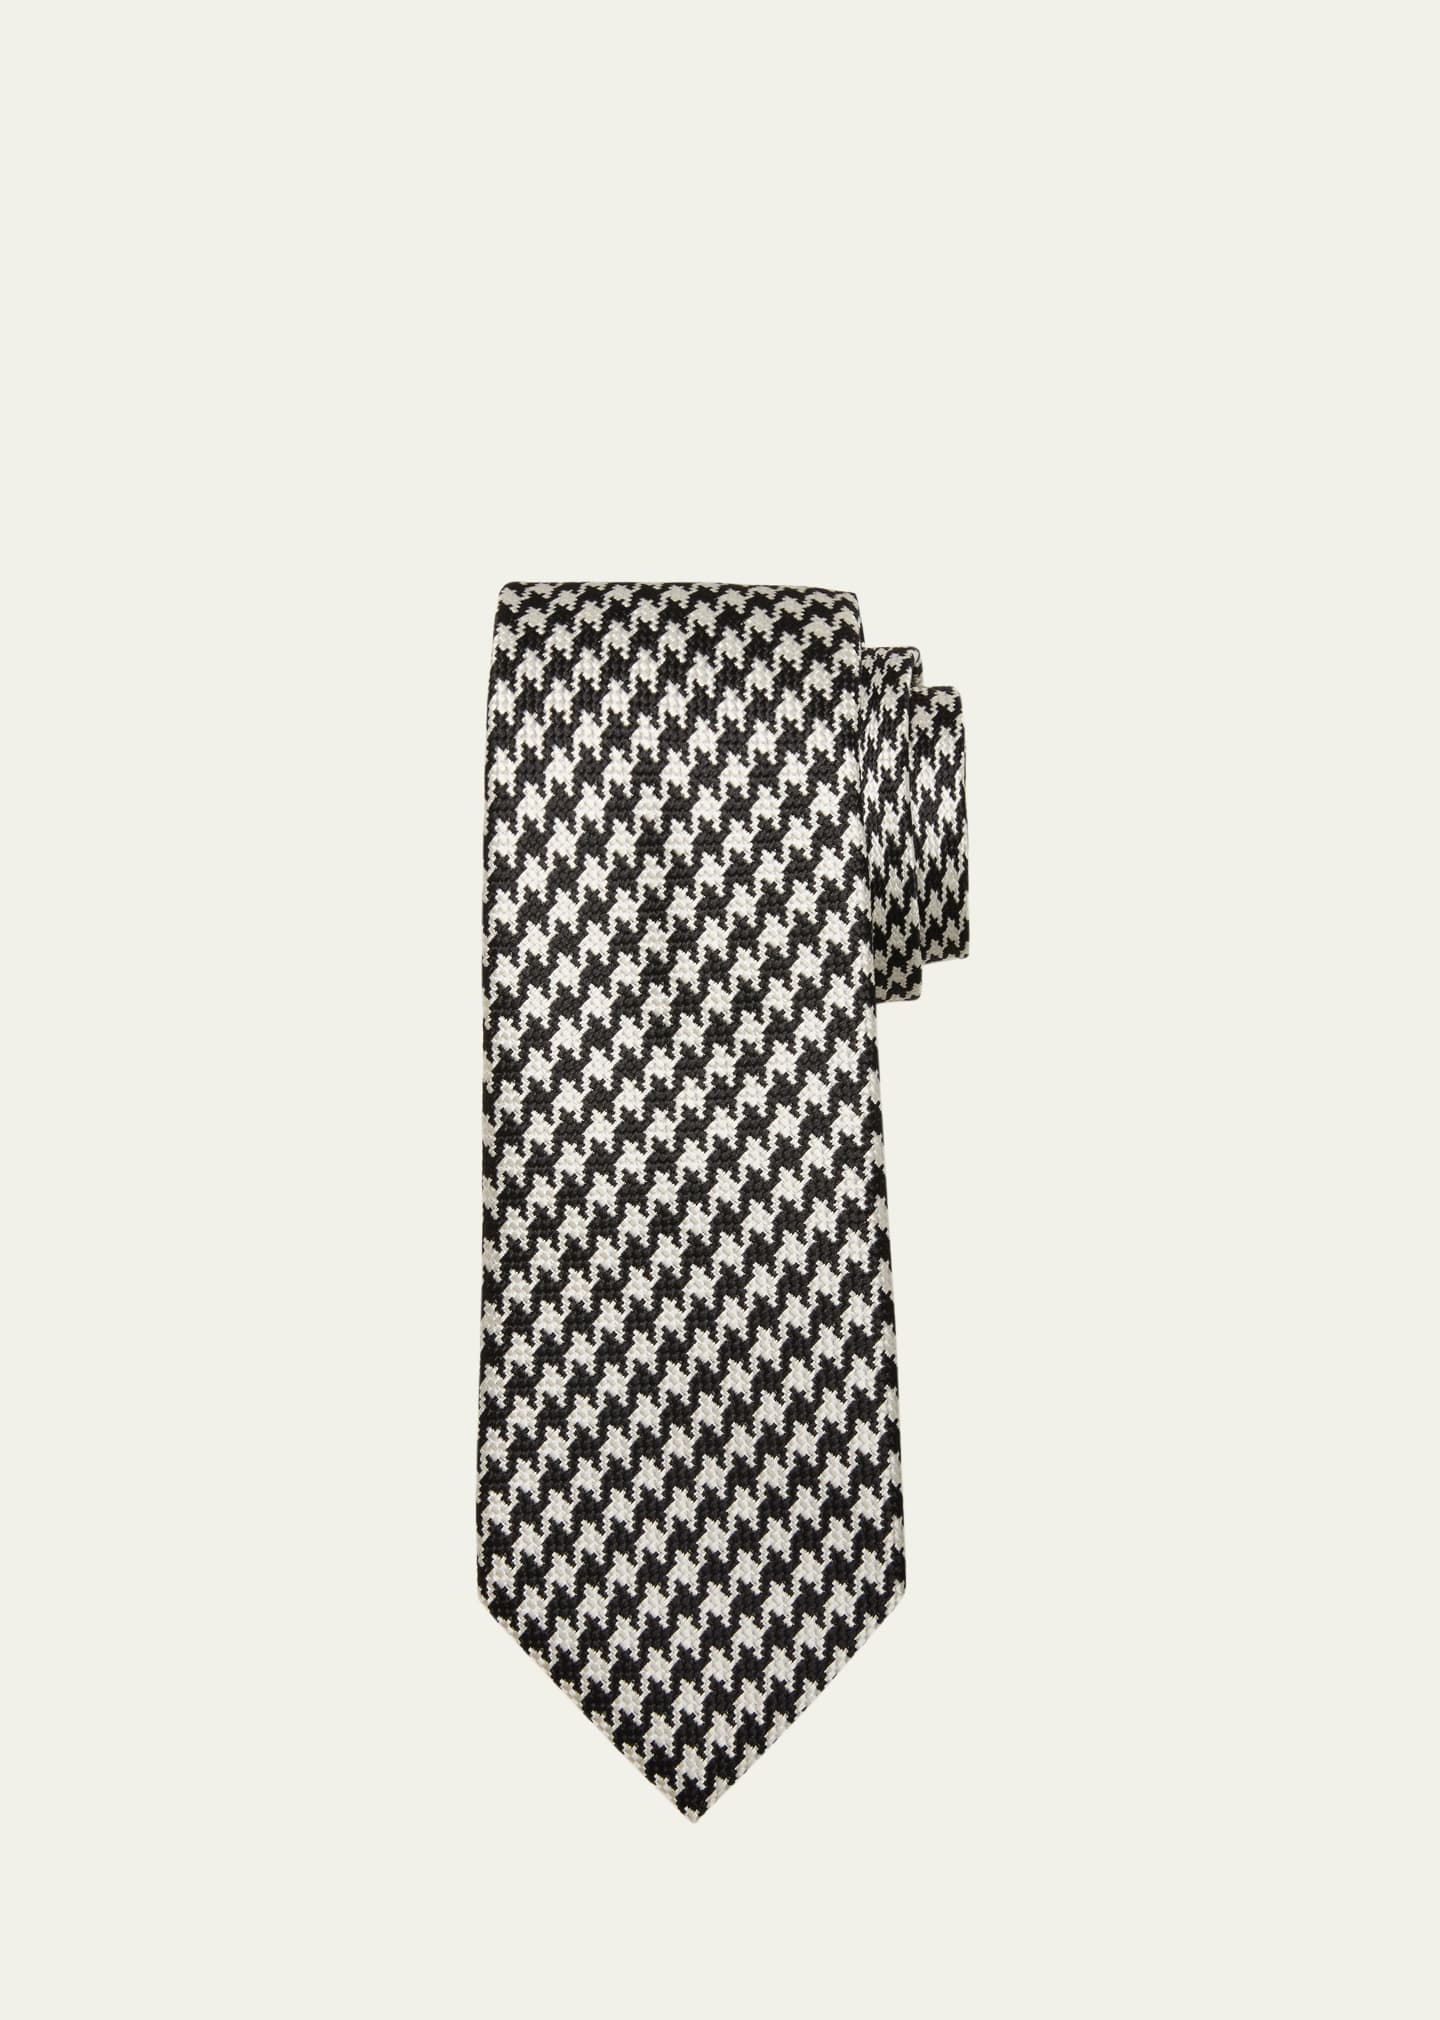 Tom Ford Men's Silk Houndstooth Tie In Black Wh